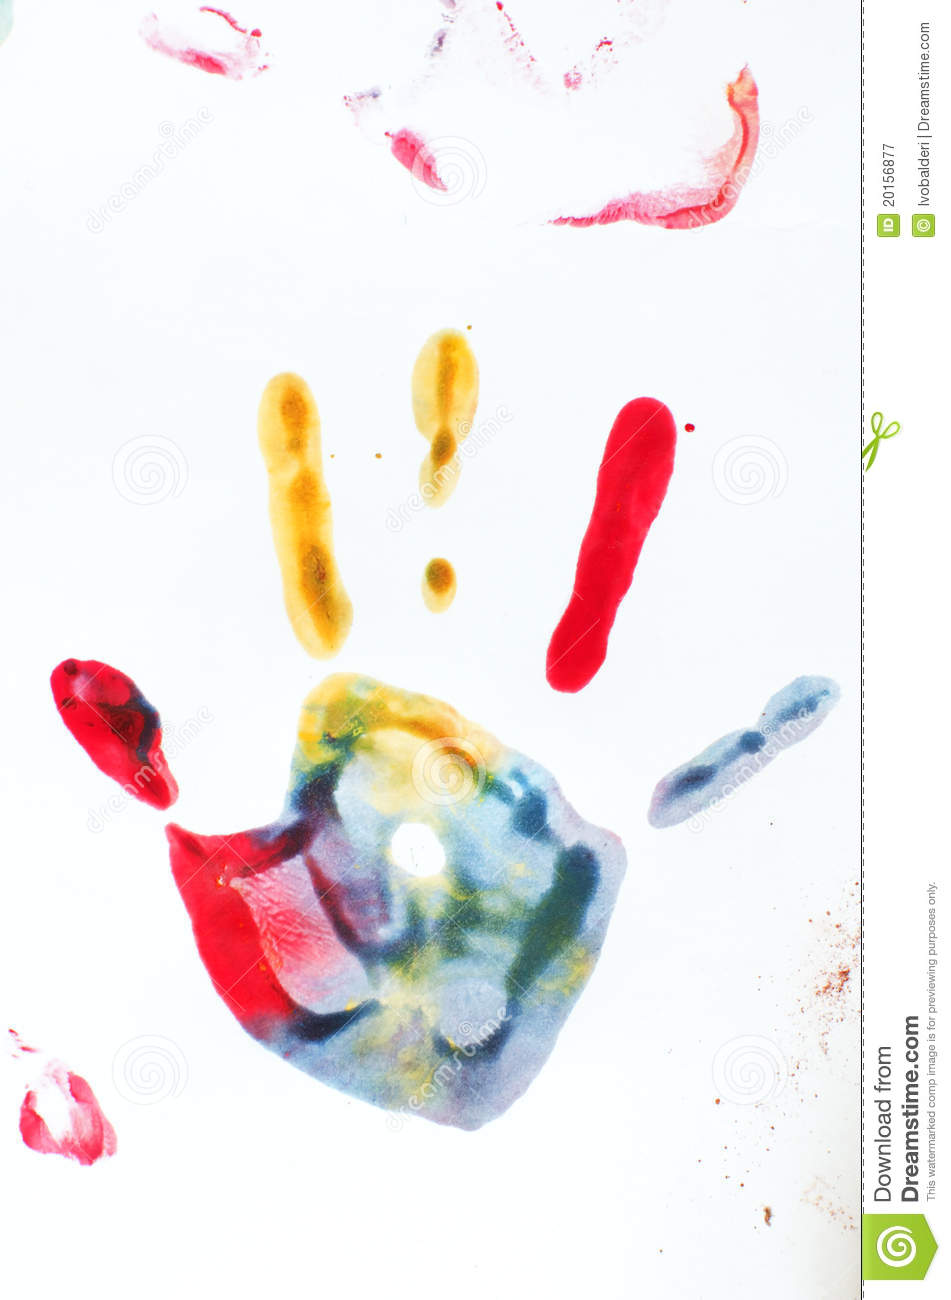 Child Hand Prints Royalty Free Stock Photography   Image  20156877